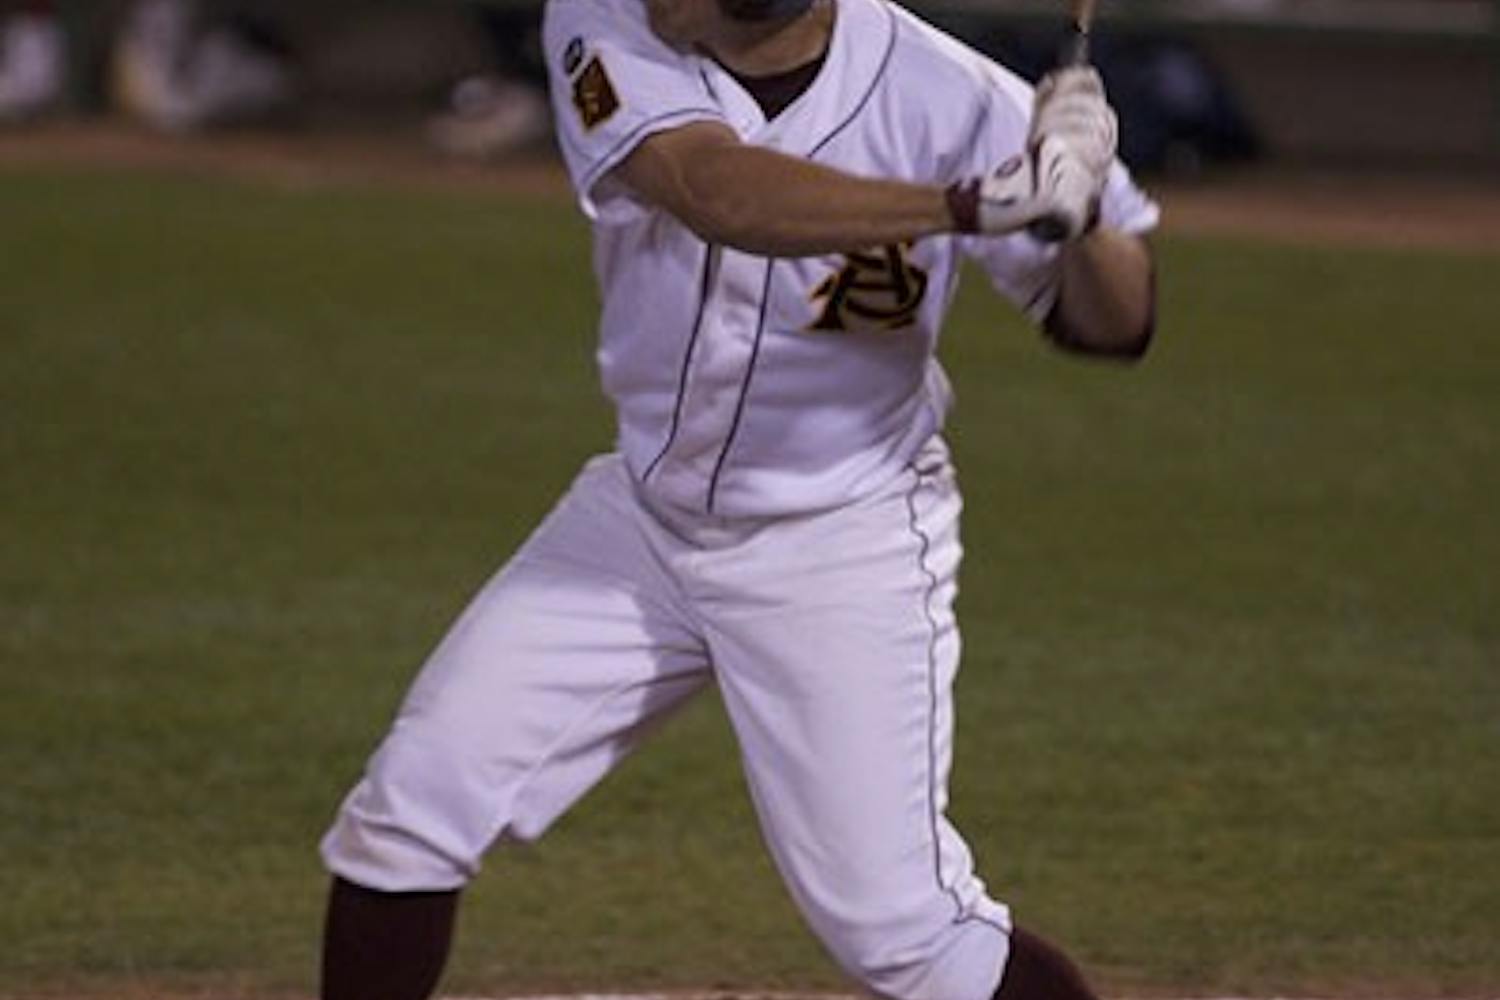 SCORING MACHINE: ASU sophomore Johnny Ruettiger went 2-for-3 with four runs scored in the Sun Devils’ 15-0 rout of San Diego Monday night at Packard Stadium. (Photo by Scott Stuk)